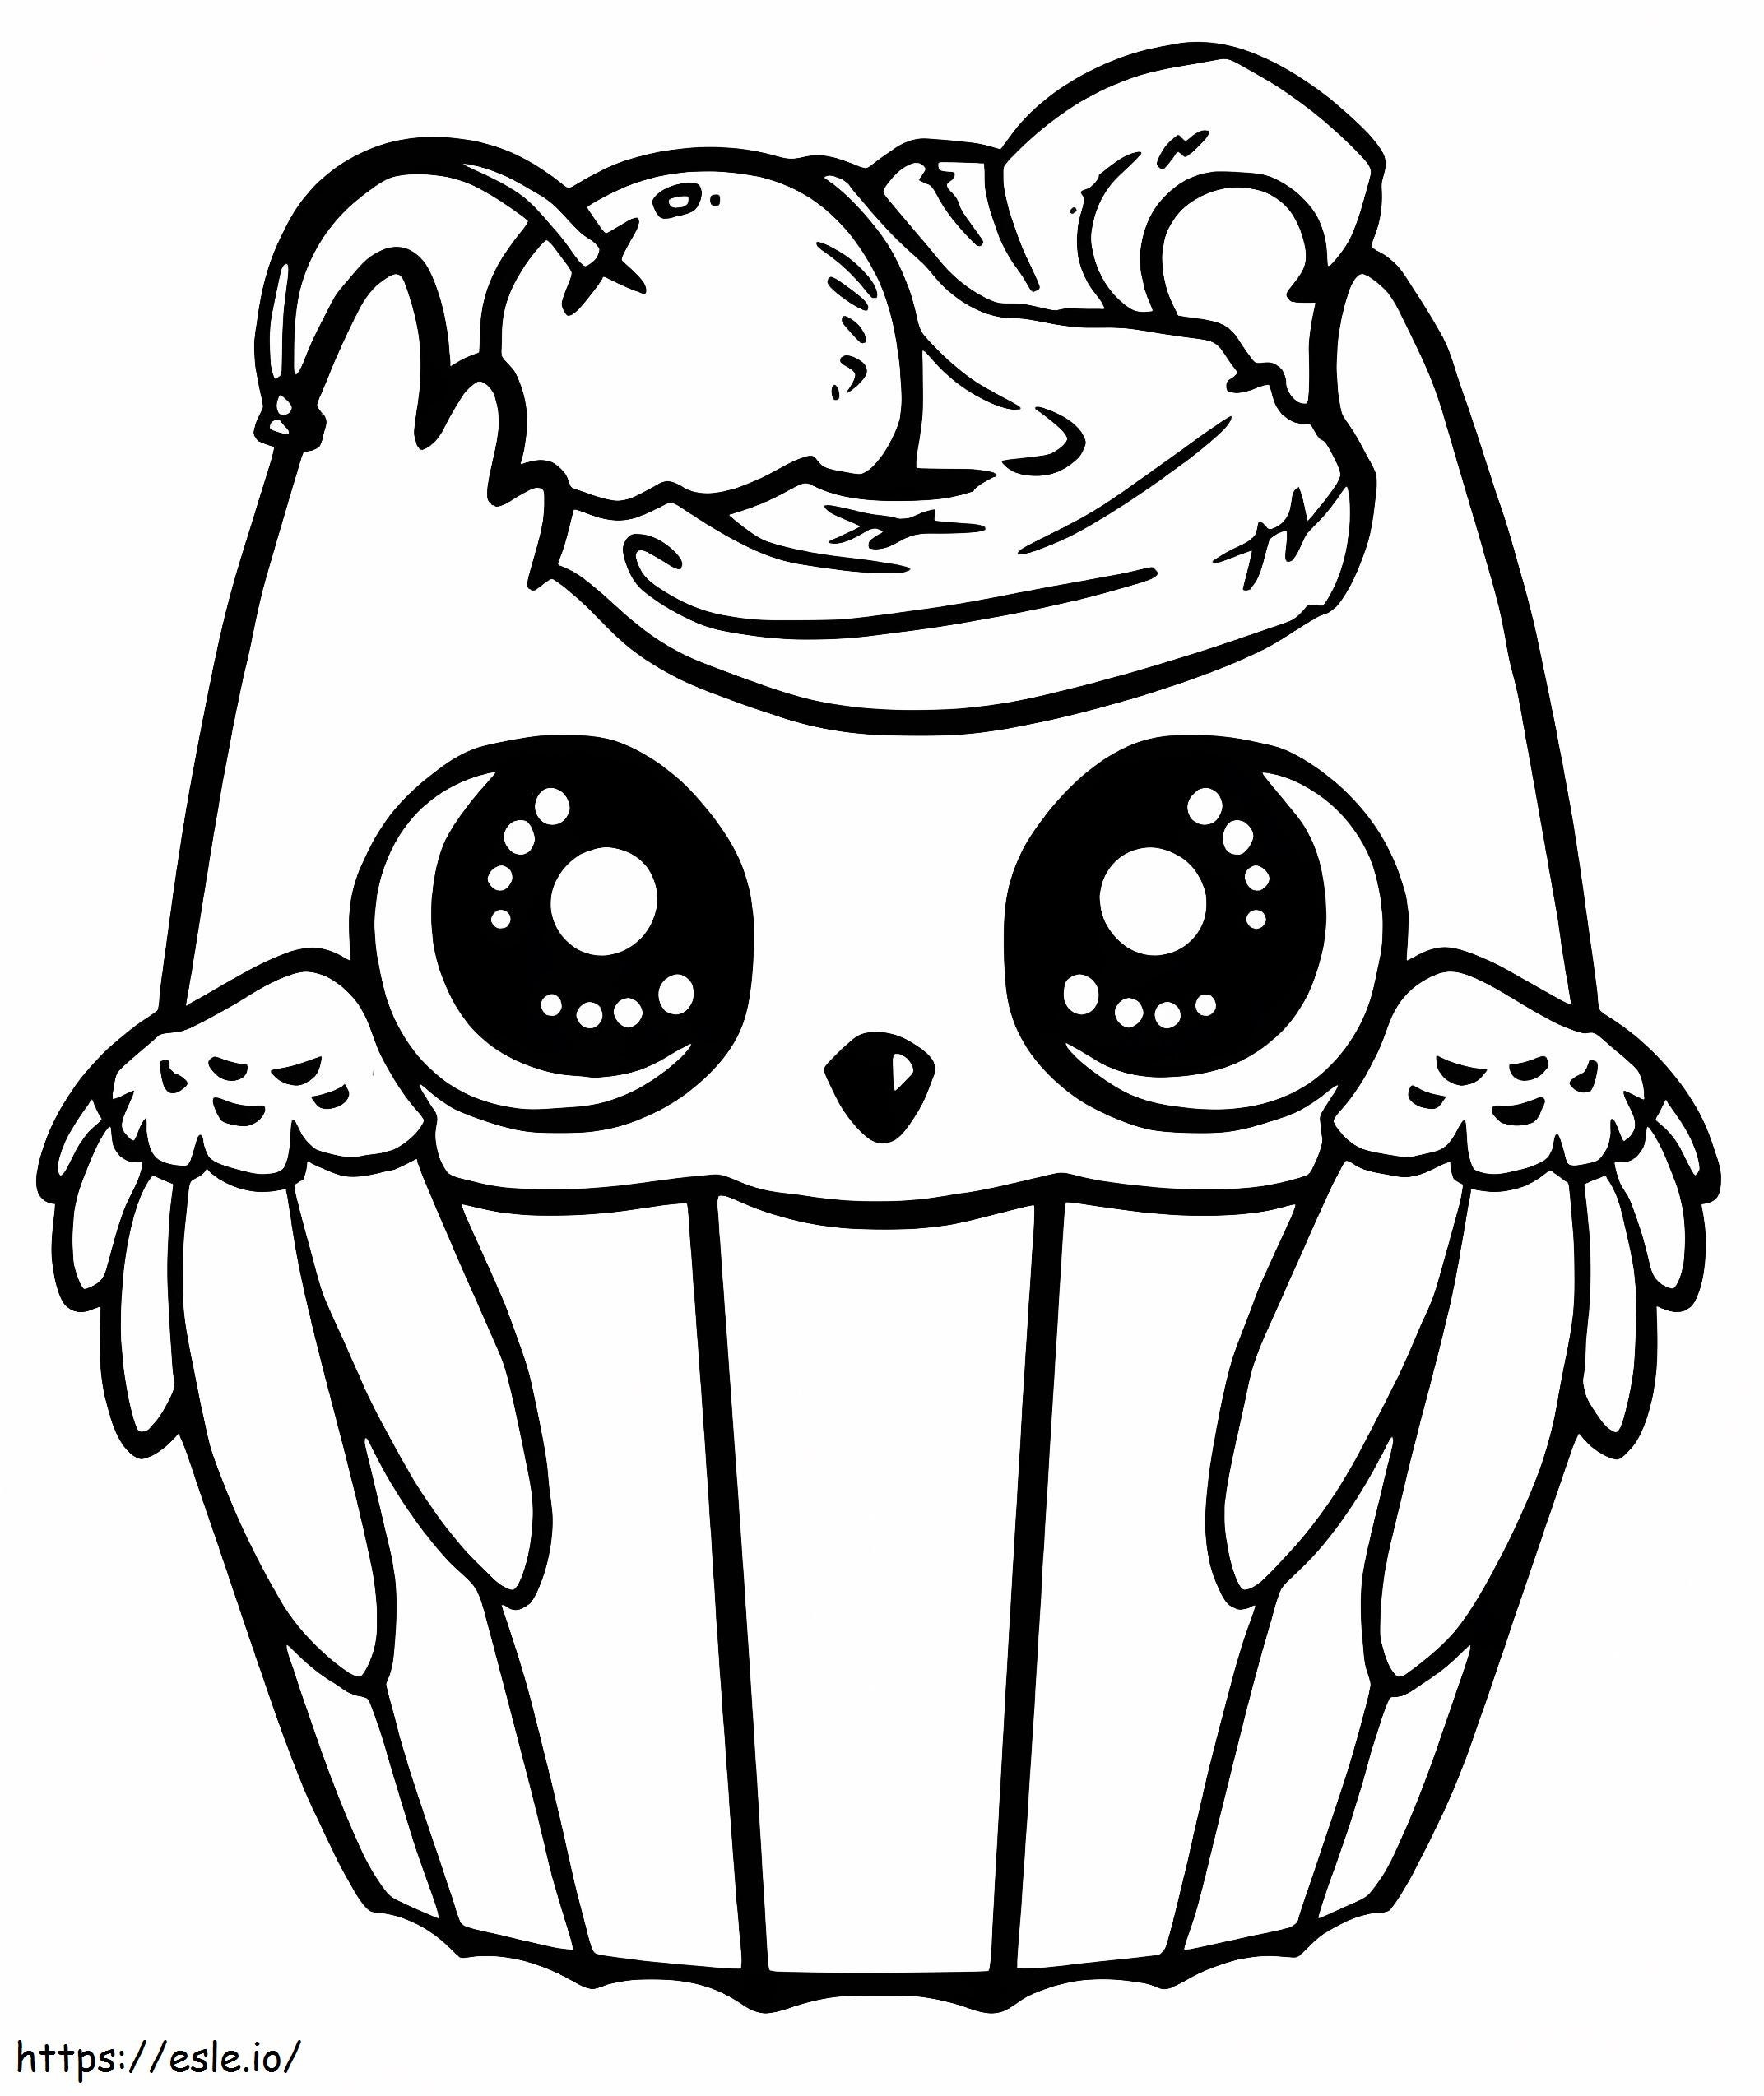 Owl In Cupcake coloring page